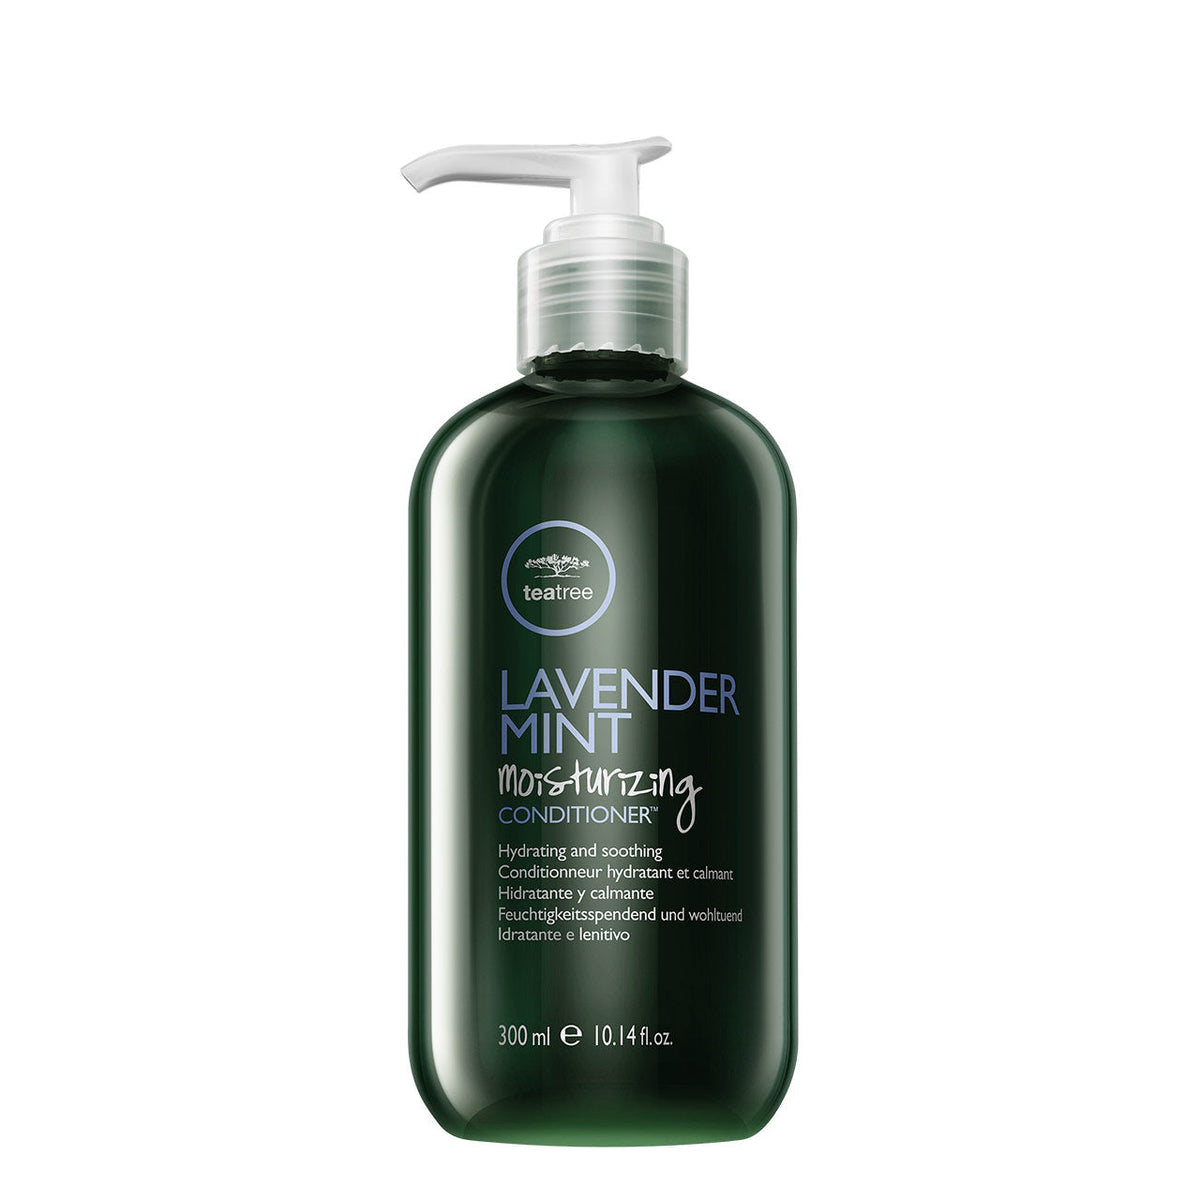 Tea Tree Lavender Mint Moisturizing Conditioner - 300ML - by Paul Mitchell |ProCare Outlet|